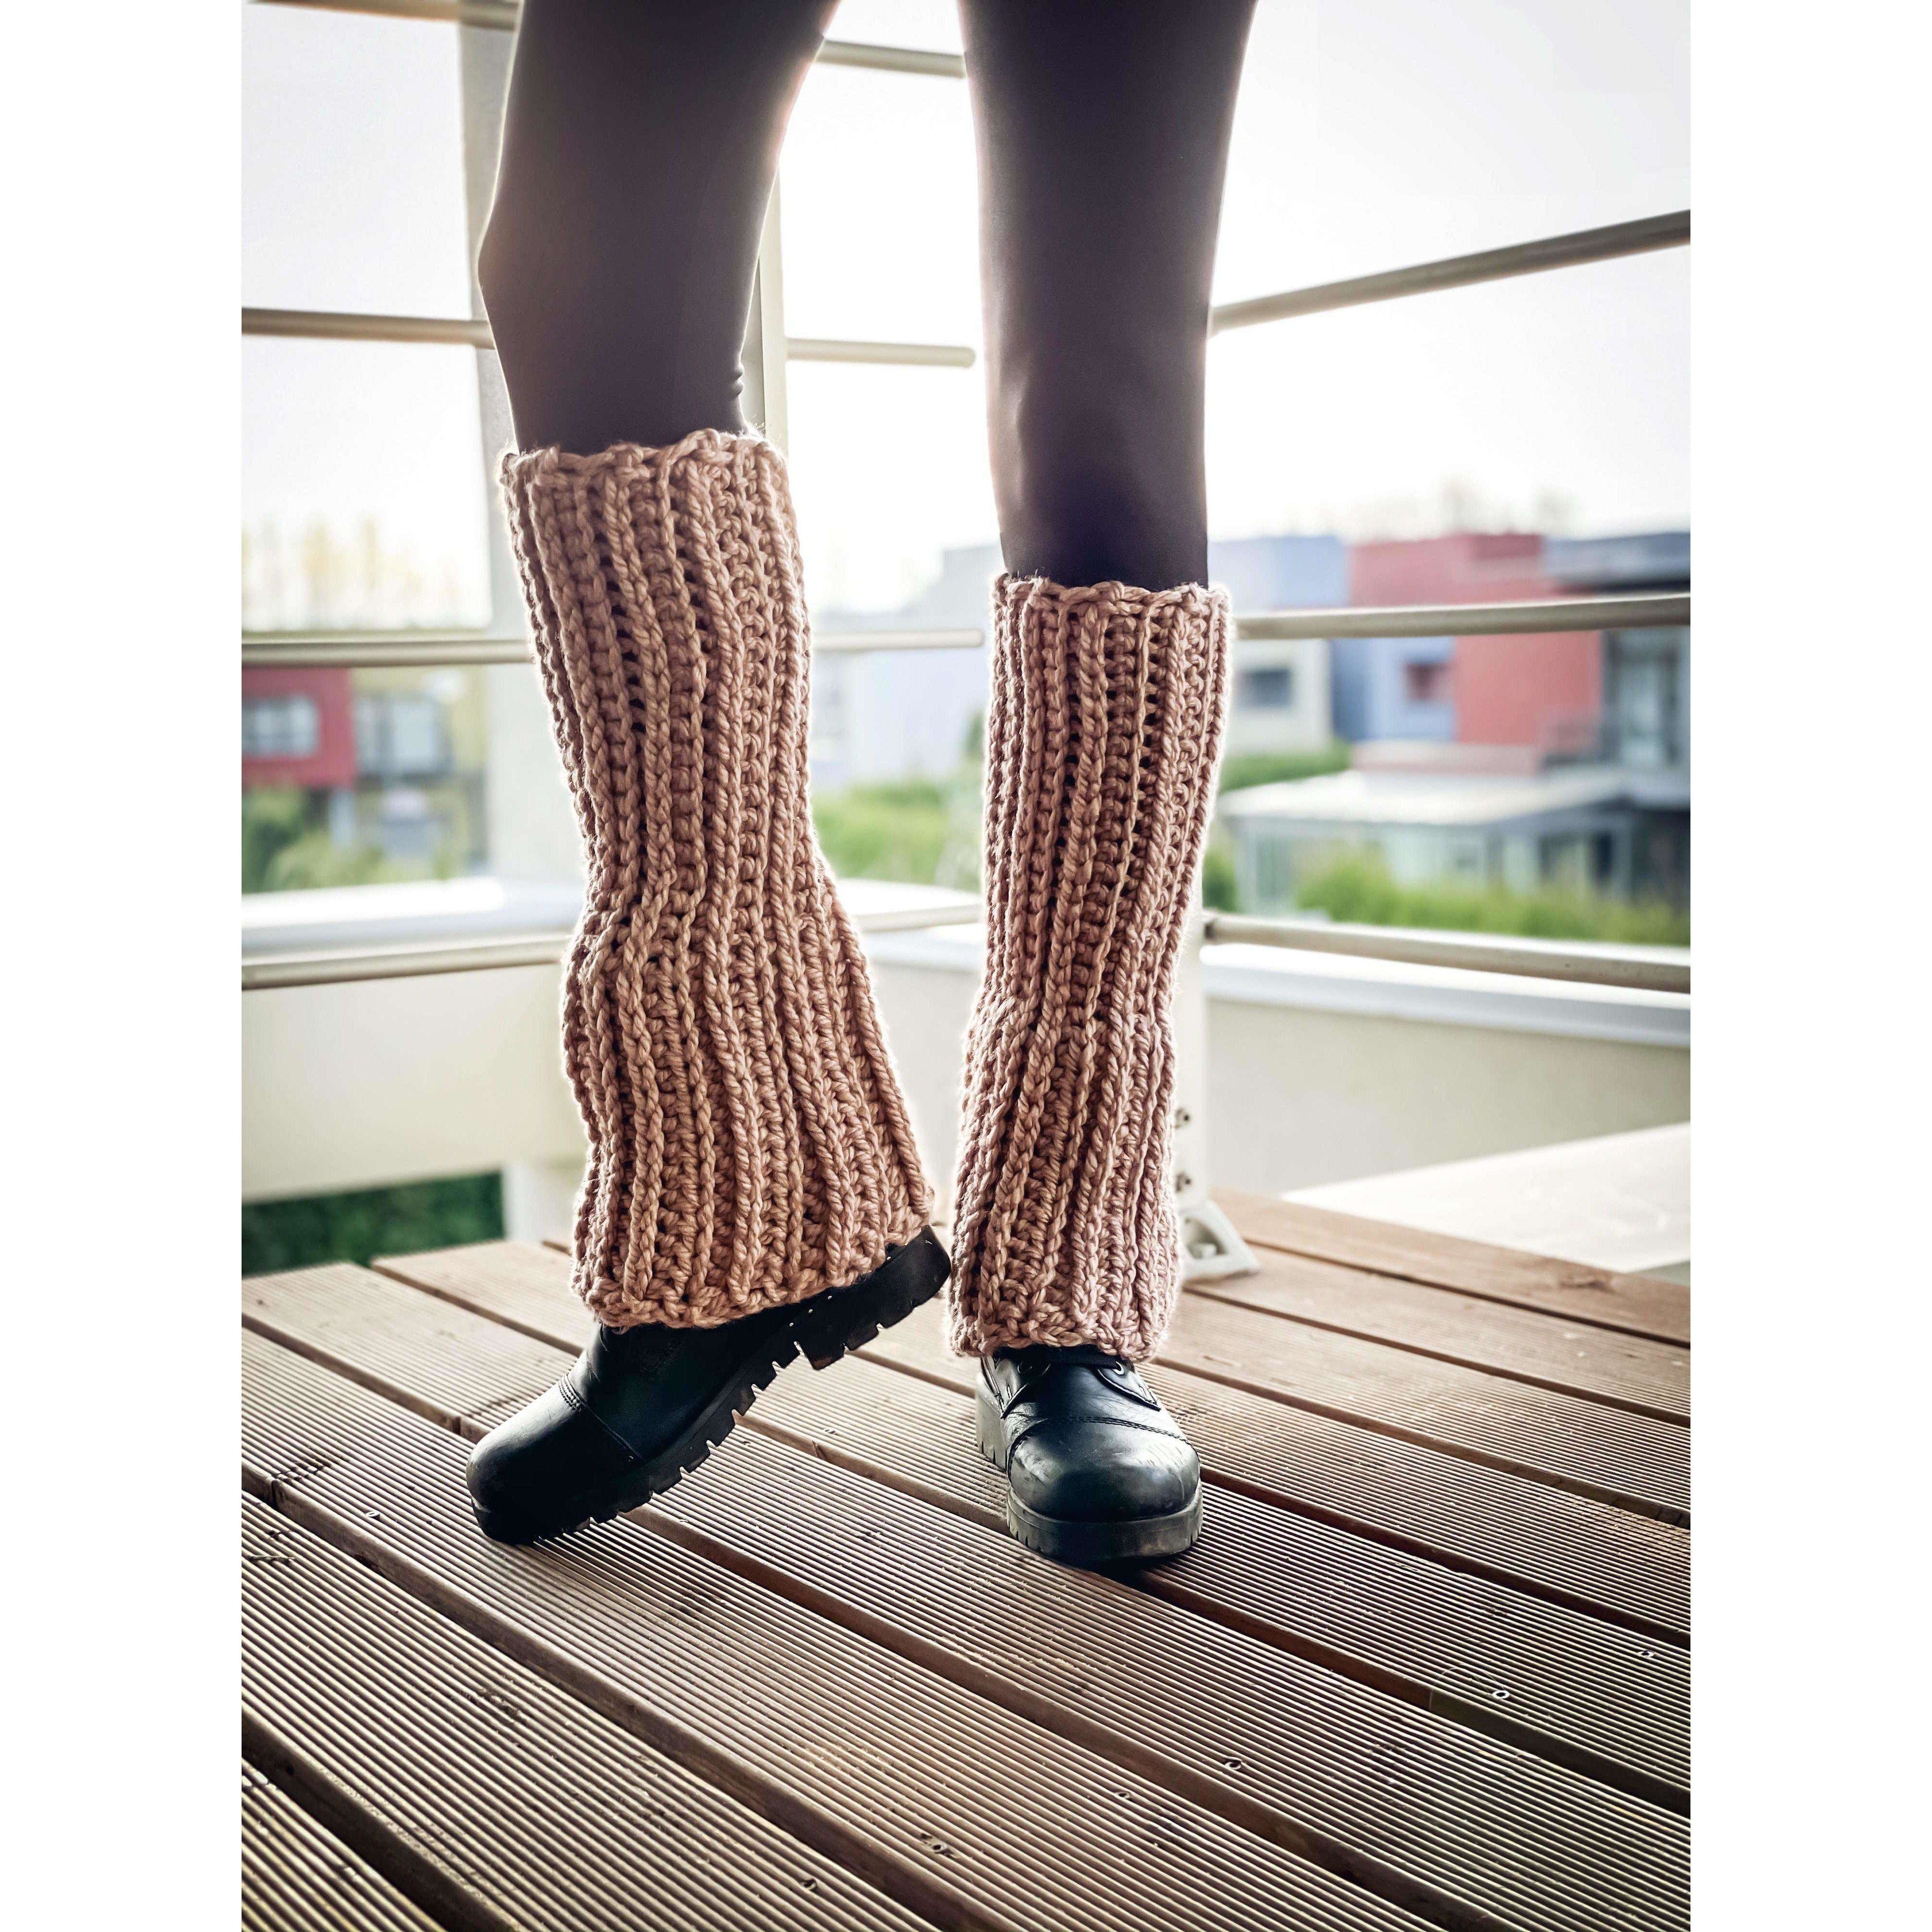 Crochet Pattern - Knit Look Boot Cuffs - TheMailoDesign - Lace Socks - TheMailoDesign